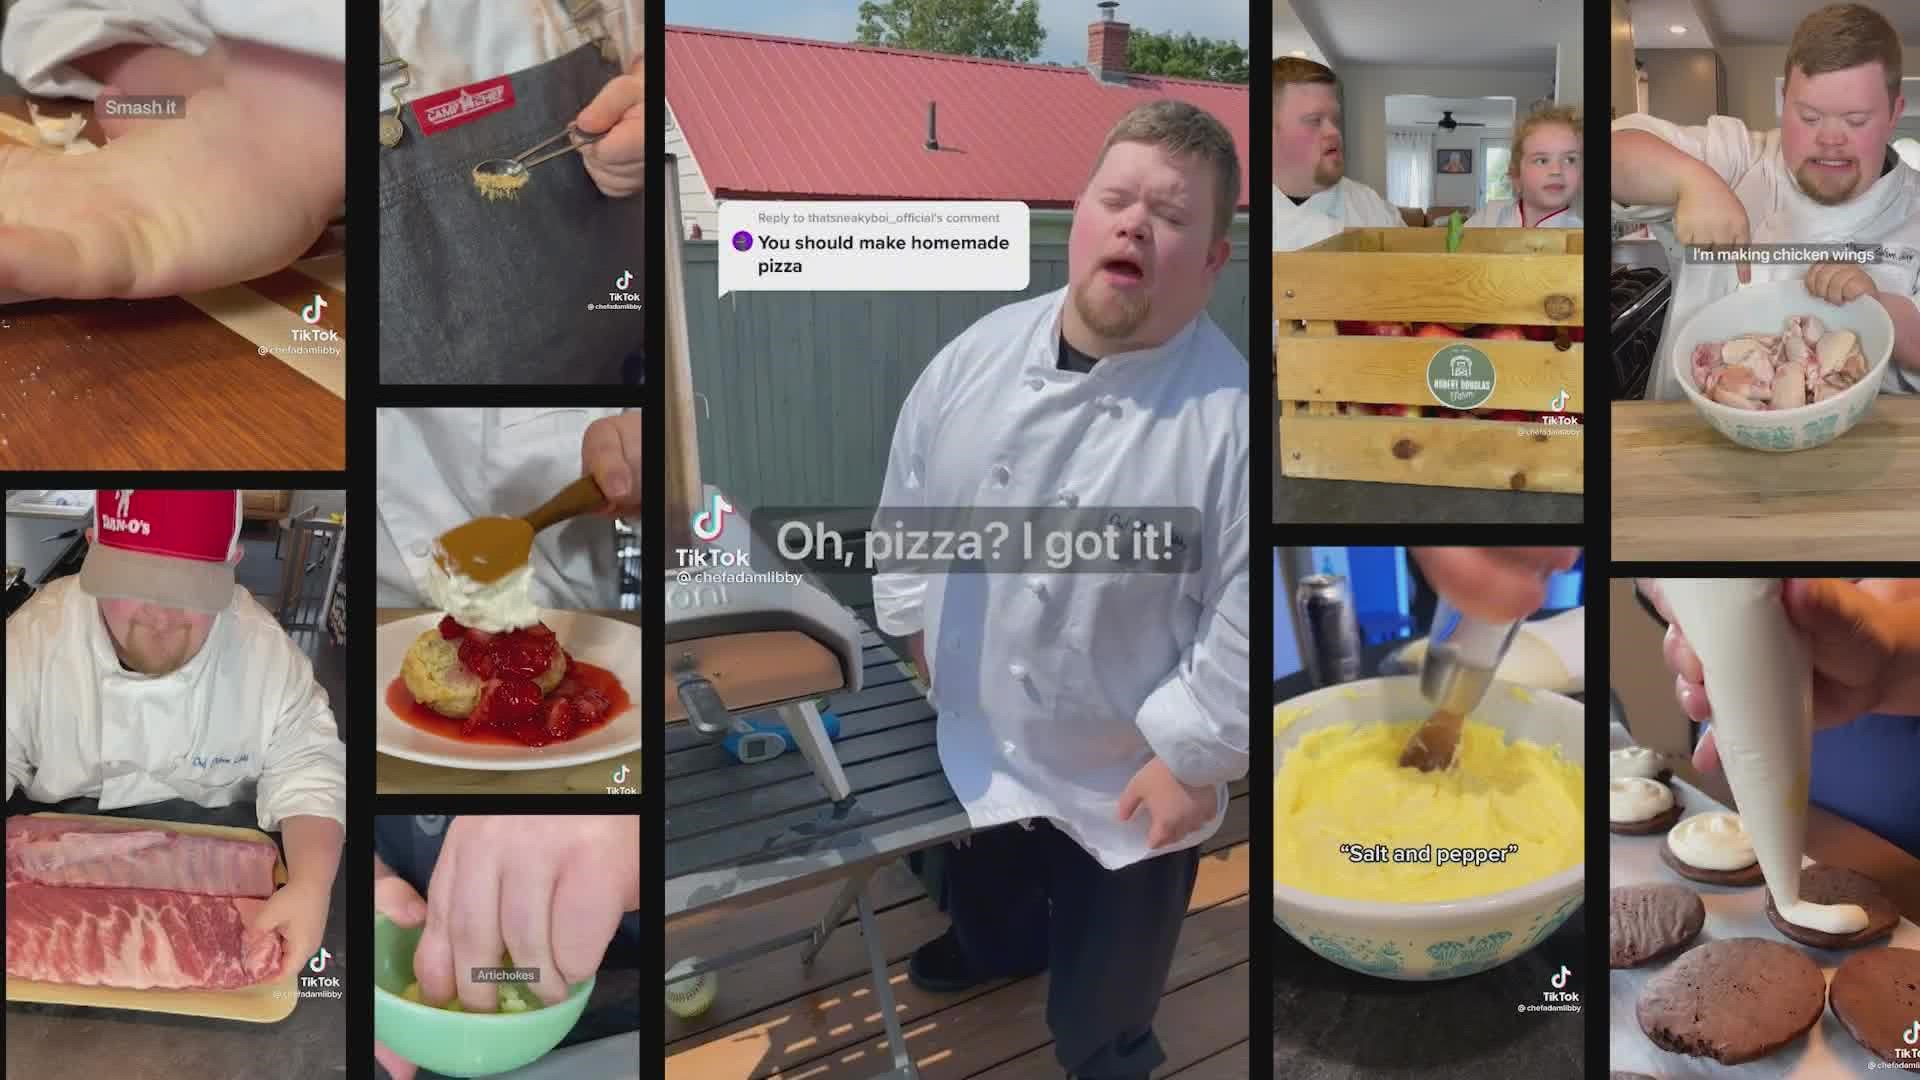 With the help of his twin sister, Adam Libby has become a star on TikTok sharing his favorite recipes with his more than 600,000 followers.